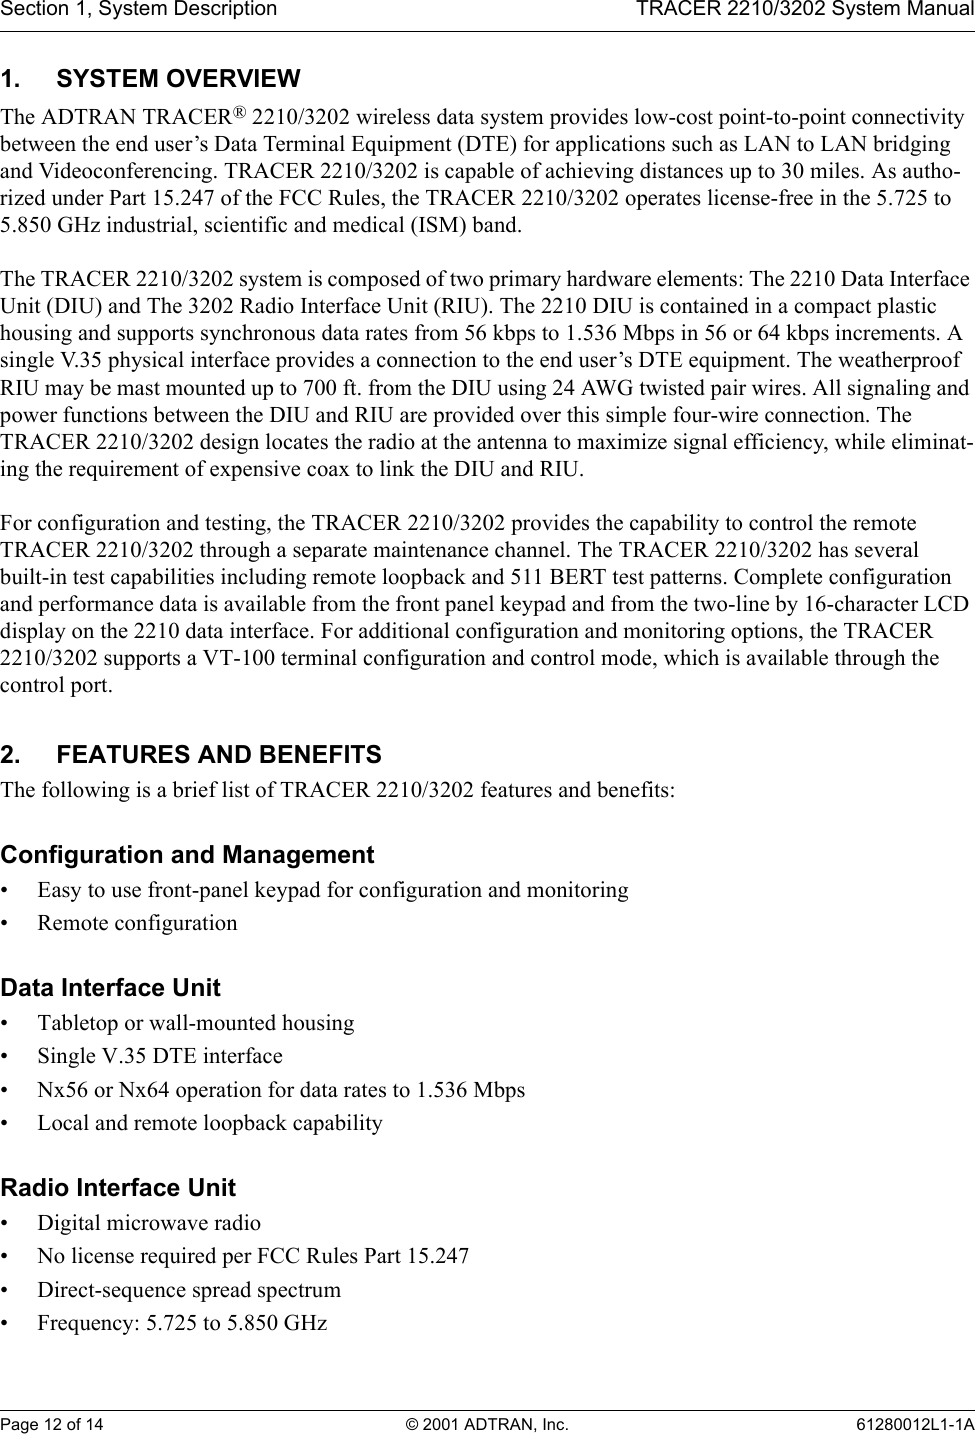 Section 1, System Description TRACER 2210/3202 System ManualPage 12 of 14 © 2001 ADTRAN, Inc. 61280012L1-1A1. SYSTEM OVERVIEWThe ADTRAN TRACER® 2210/3202 wireless data system provides low-cost point-to-point connectivity between the end user’s Data Terminal Equipment (DTE) for applications such as LAN to LAN bridging and Videoconferencing. TRACER 2210/3202 is capable of achieving distances up to 30 miles. As autho-rized under Part 15.247 of the FCC Rules, the TRACER 2210/3202 operates license-free in the 5.725 to 5.850 GHz industrial, scientific and medical (ISM) band.The TRACER 2210/3202 system is composed of two primary hardware elements: The 2210 Data Interface Unit (DIU) and The 3202 Radio Interface Unit (RIU). The 2210 DIU is contained in a compact plastic housing and supports synchronous data rates from 56 kbps to 1.536 Mbps in 56 or 64 kbps increments. A single V.35 physical interface provides a connection to the end user’s DTE equipment. The weatherproof RIU may be mast mounted up to 700 ft. from the DIU using 24 AWG twisted pair wires. All signaling and power functions between the DIU and RIU are provided over this simple four-wire connection. The TRACER 2210/3202 design locates the radio at the antenna to maximize signal efficiency, while eliminat-ing the requirement of expensive coax to link the DIU and RIU.For configuration and testing, the TRACER 2210/3202 provides the capability to control the remote TRACER 2210/3202 through a separate maintenance channel. The TRACER 2210/3202 has several built-in test capabilities including remote loopback and 511 BERT test patterns. Complete configuration and performance data is available from the front panel keypad and from the two-line by 16-character LCD display on the 2210 data interface. For additional configuration and monitoring options, the TRACER 2210/3202 supports a VT-100 terminal configuration and control mode, which is available through the control port.2. FEATURES AND BENEFITSThe following is a brief list of TRACER 2210/3202 features and benefits:Configuration and Management• Easy to use front-panel keypad for configuration and monitoring• Remote configurationData Interface Unit• Tabletop or wall-mounted housing• Single V.35 DTE interface• Nx56 or Nx64 operation for data rates to 1.536 Mbps• Local and remote loopback capabilityRadio Interface Unit• Digital microwave radio• No license required per FCC Rules Part 15.247• Direct-sequence spread spectrum• Frequency: 5.725 to 5.850 GHz